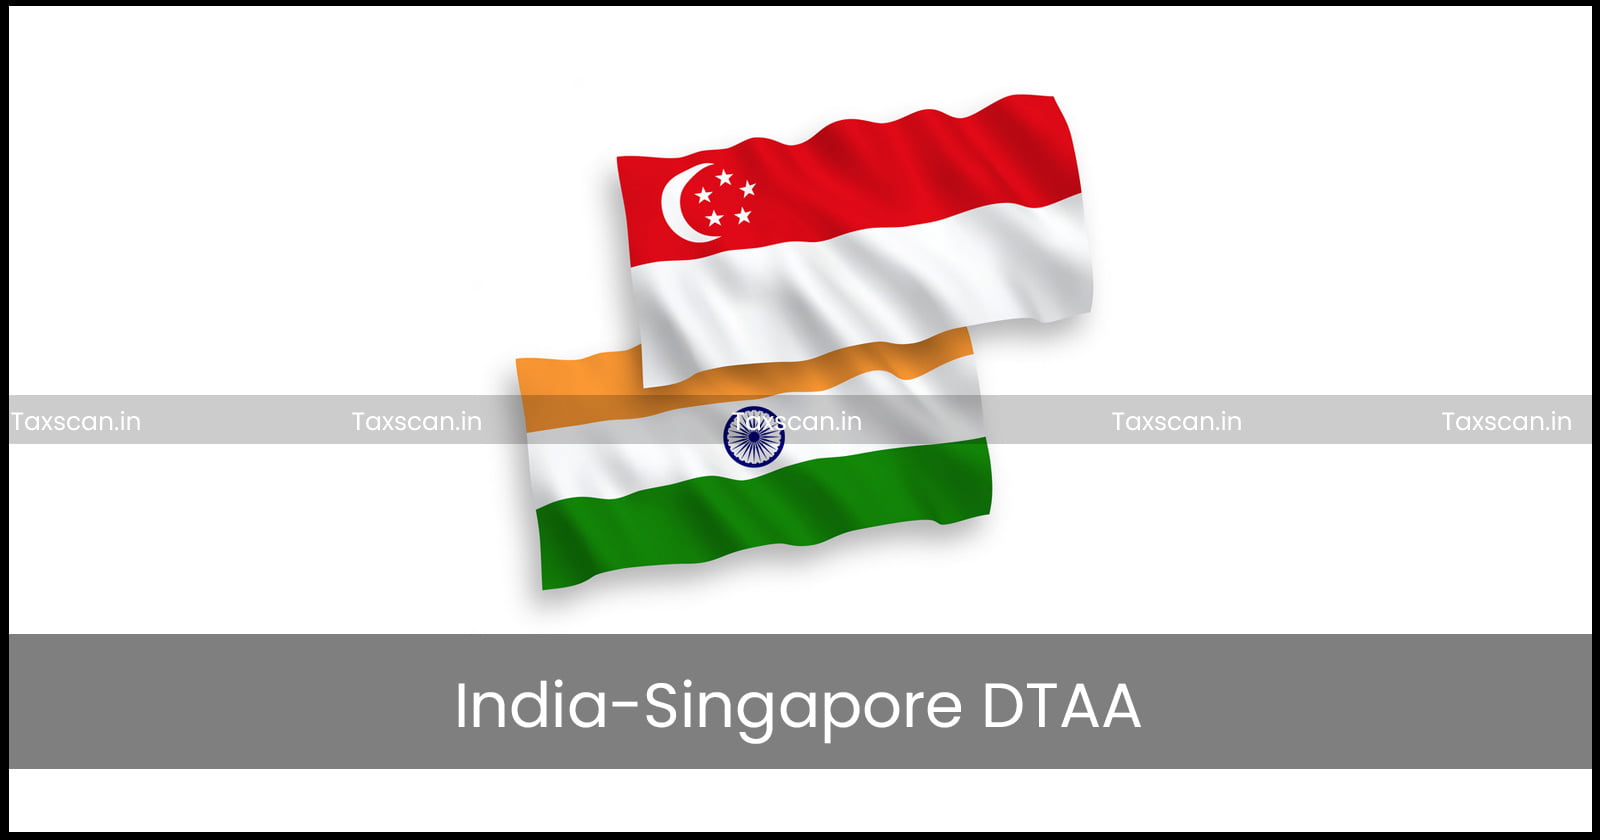 Income Tax - Double Taxation Avoidance Agreement - India Singapore DTAA - ITAT Delhi - fees for technical services - taxscan